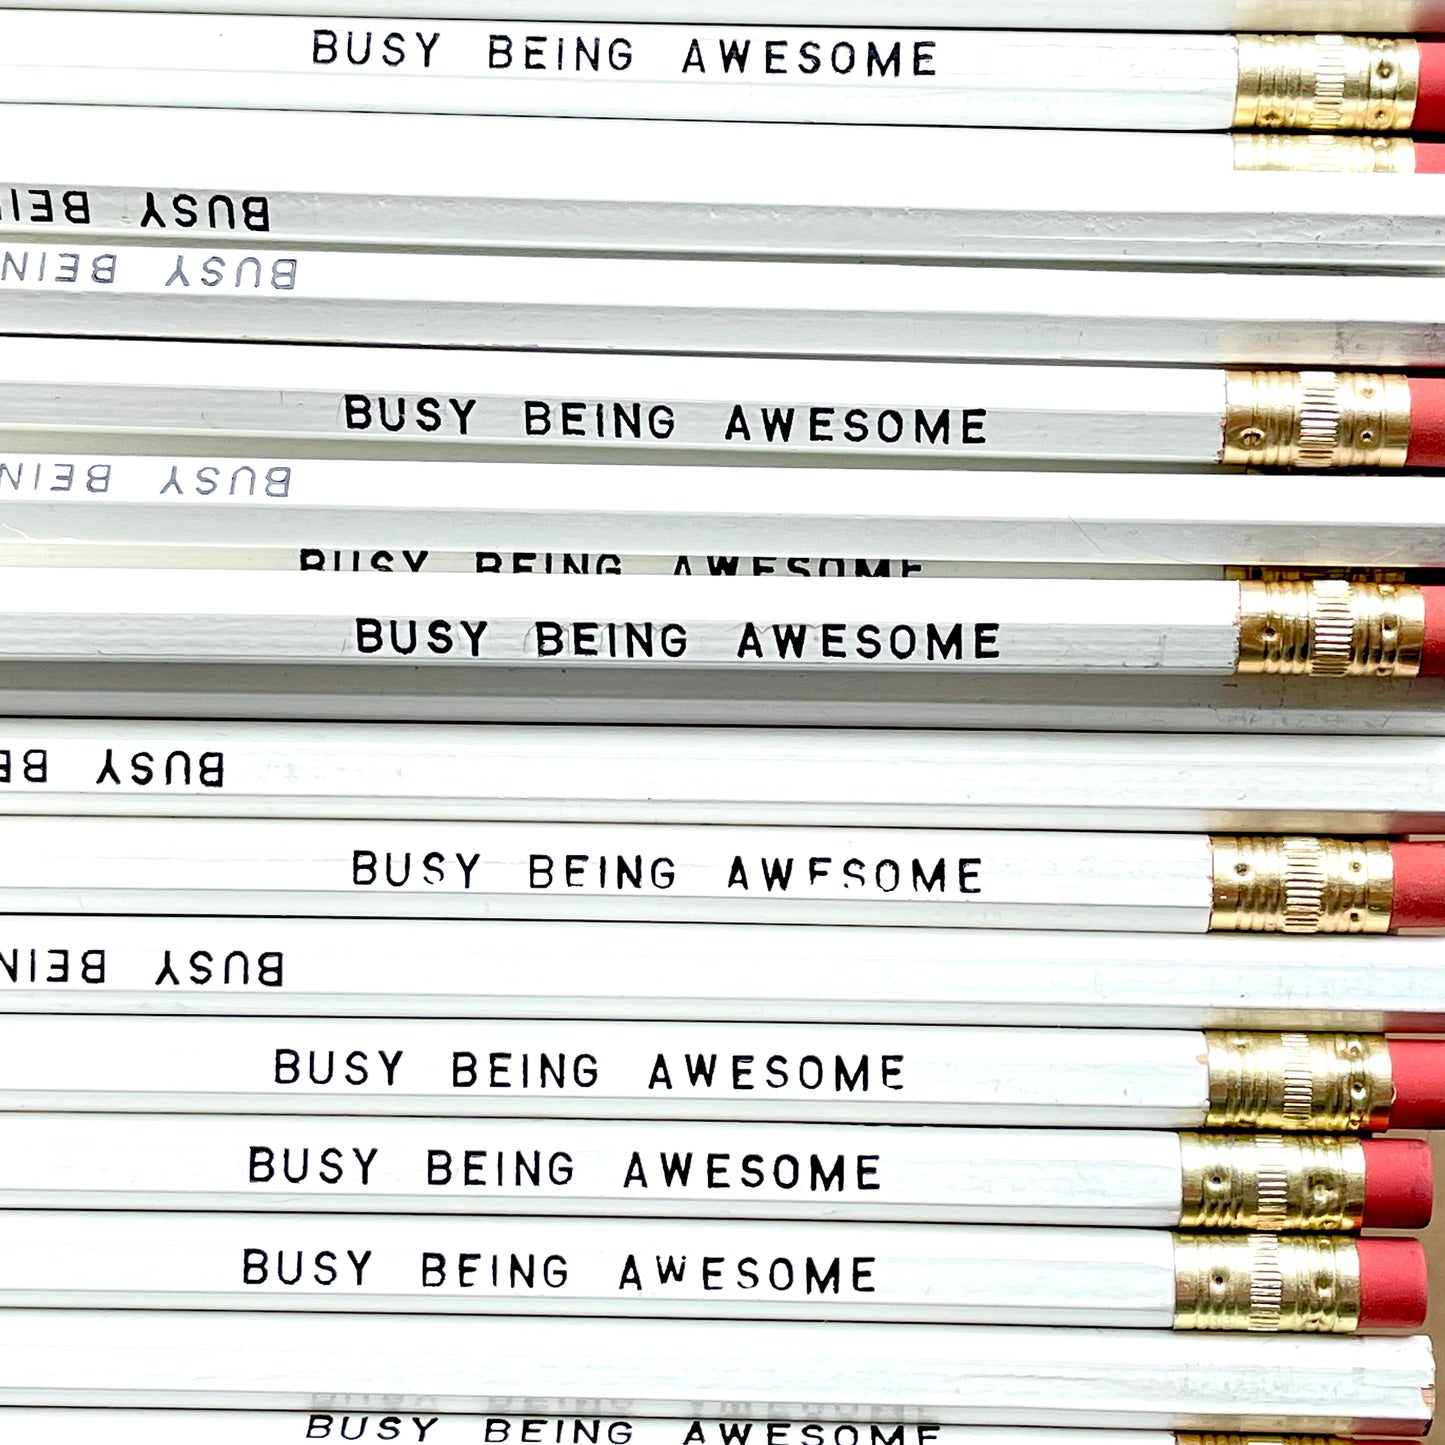 LESS THAN PERFECT PENCILS - BUSY BEING AWESOME PENCIL SET